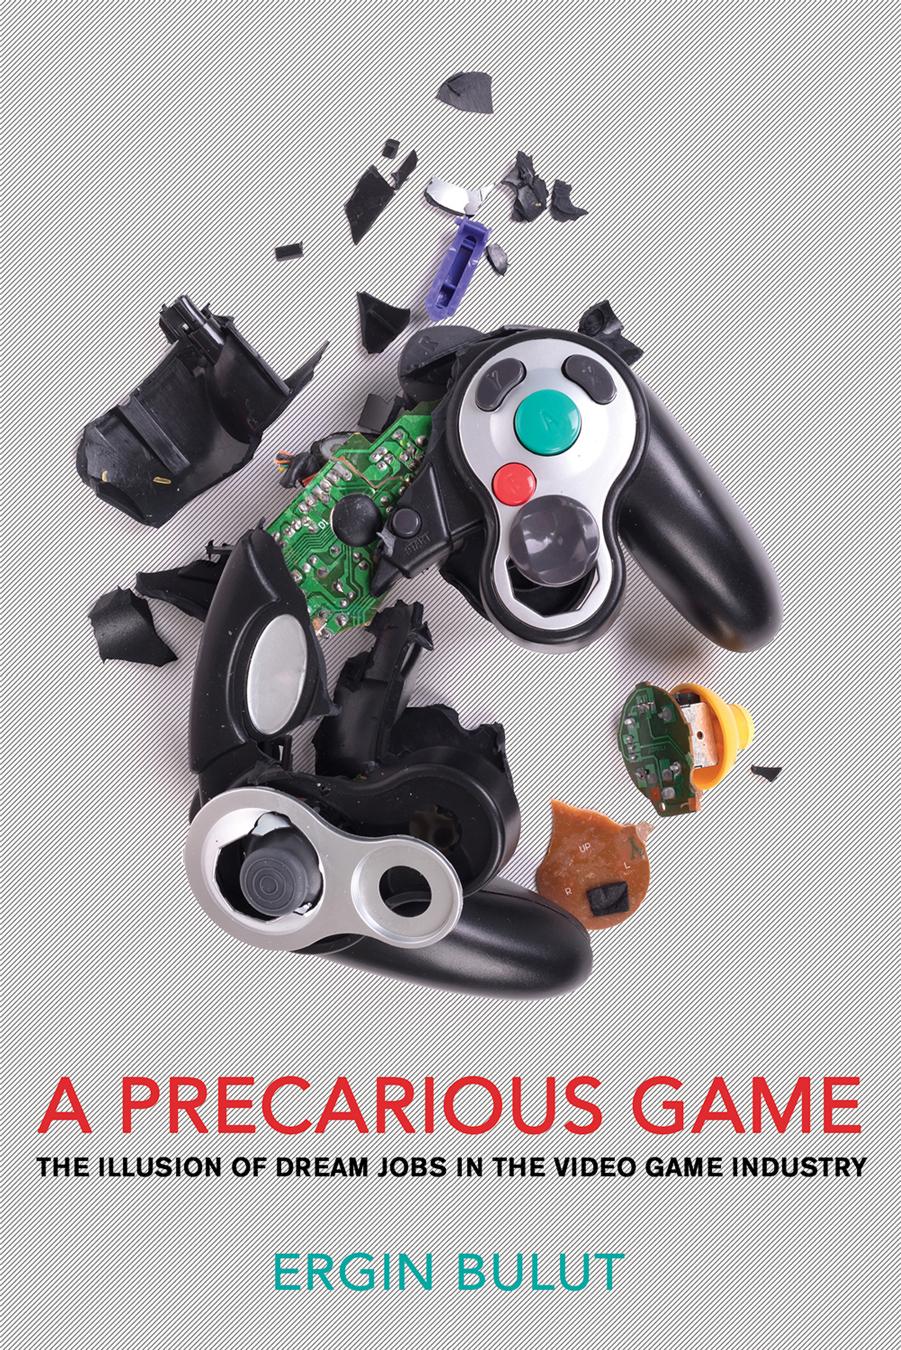 A Precarious Game: The Illusion of Dream Jobs in the Video Game Industry by Ergin Bulut